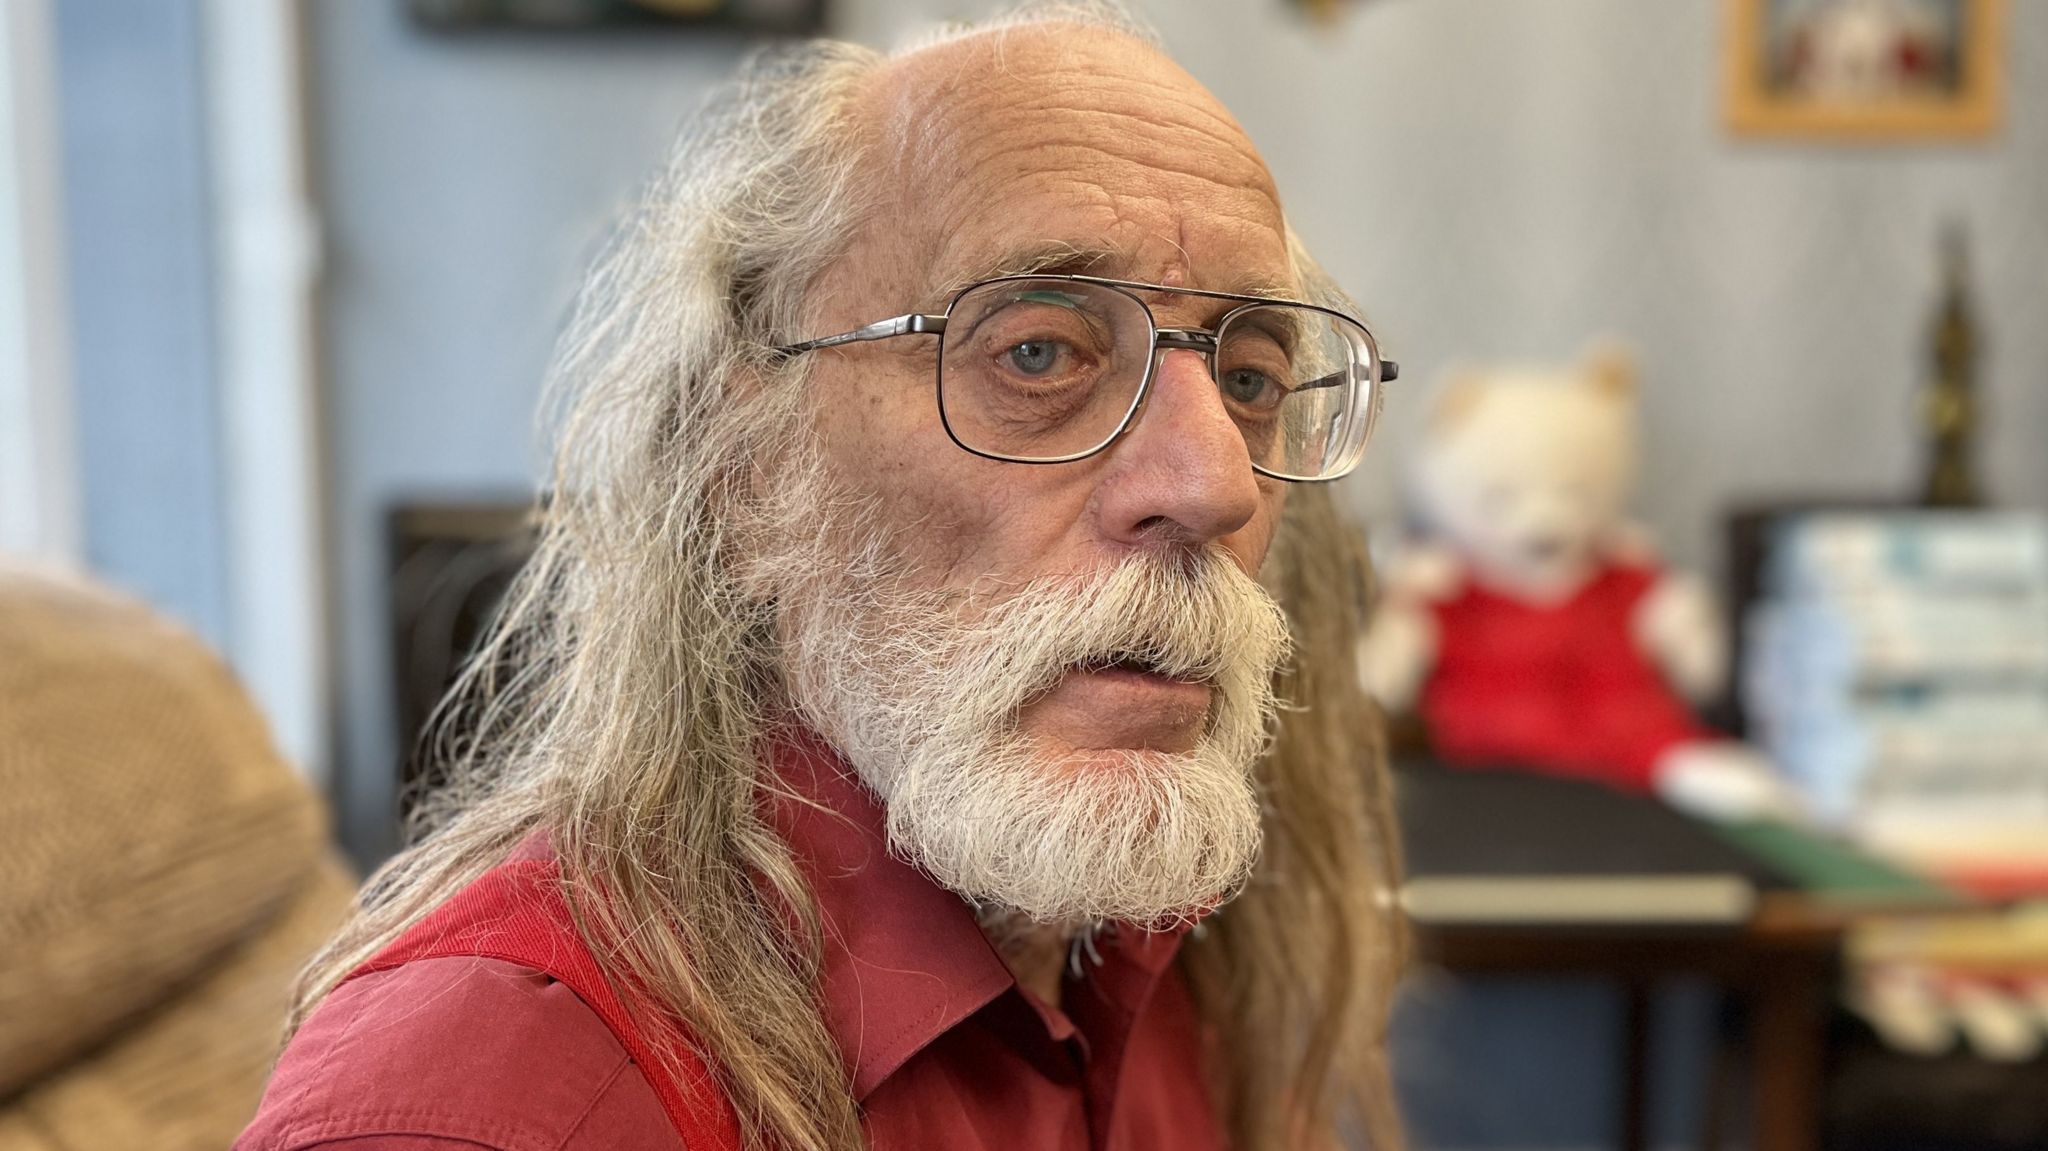 James Leonard with long grey hair and beard wearing glasses and a red shirt